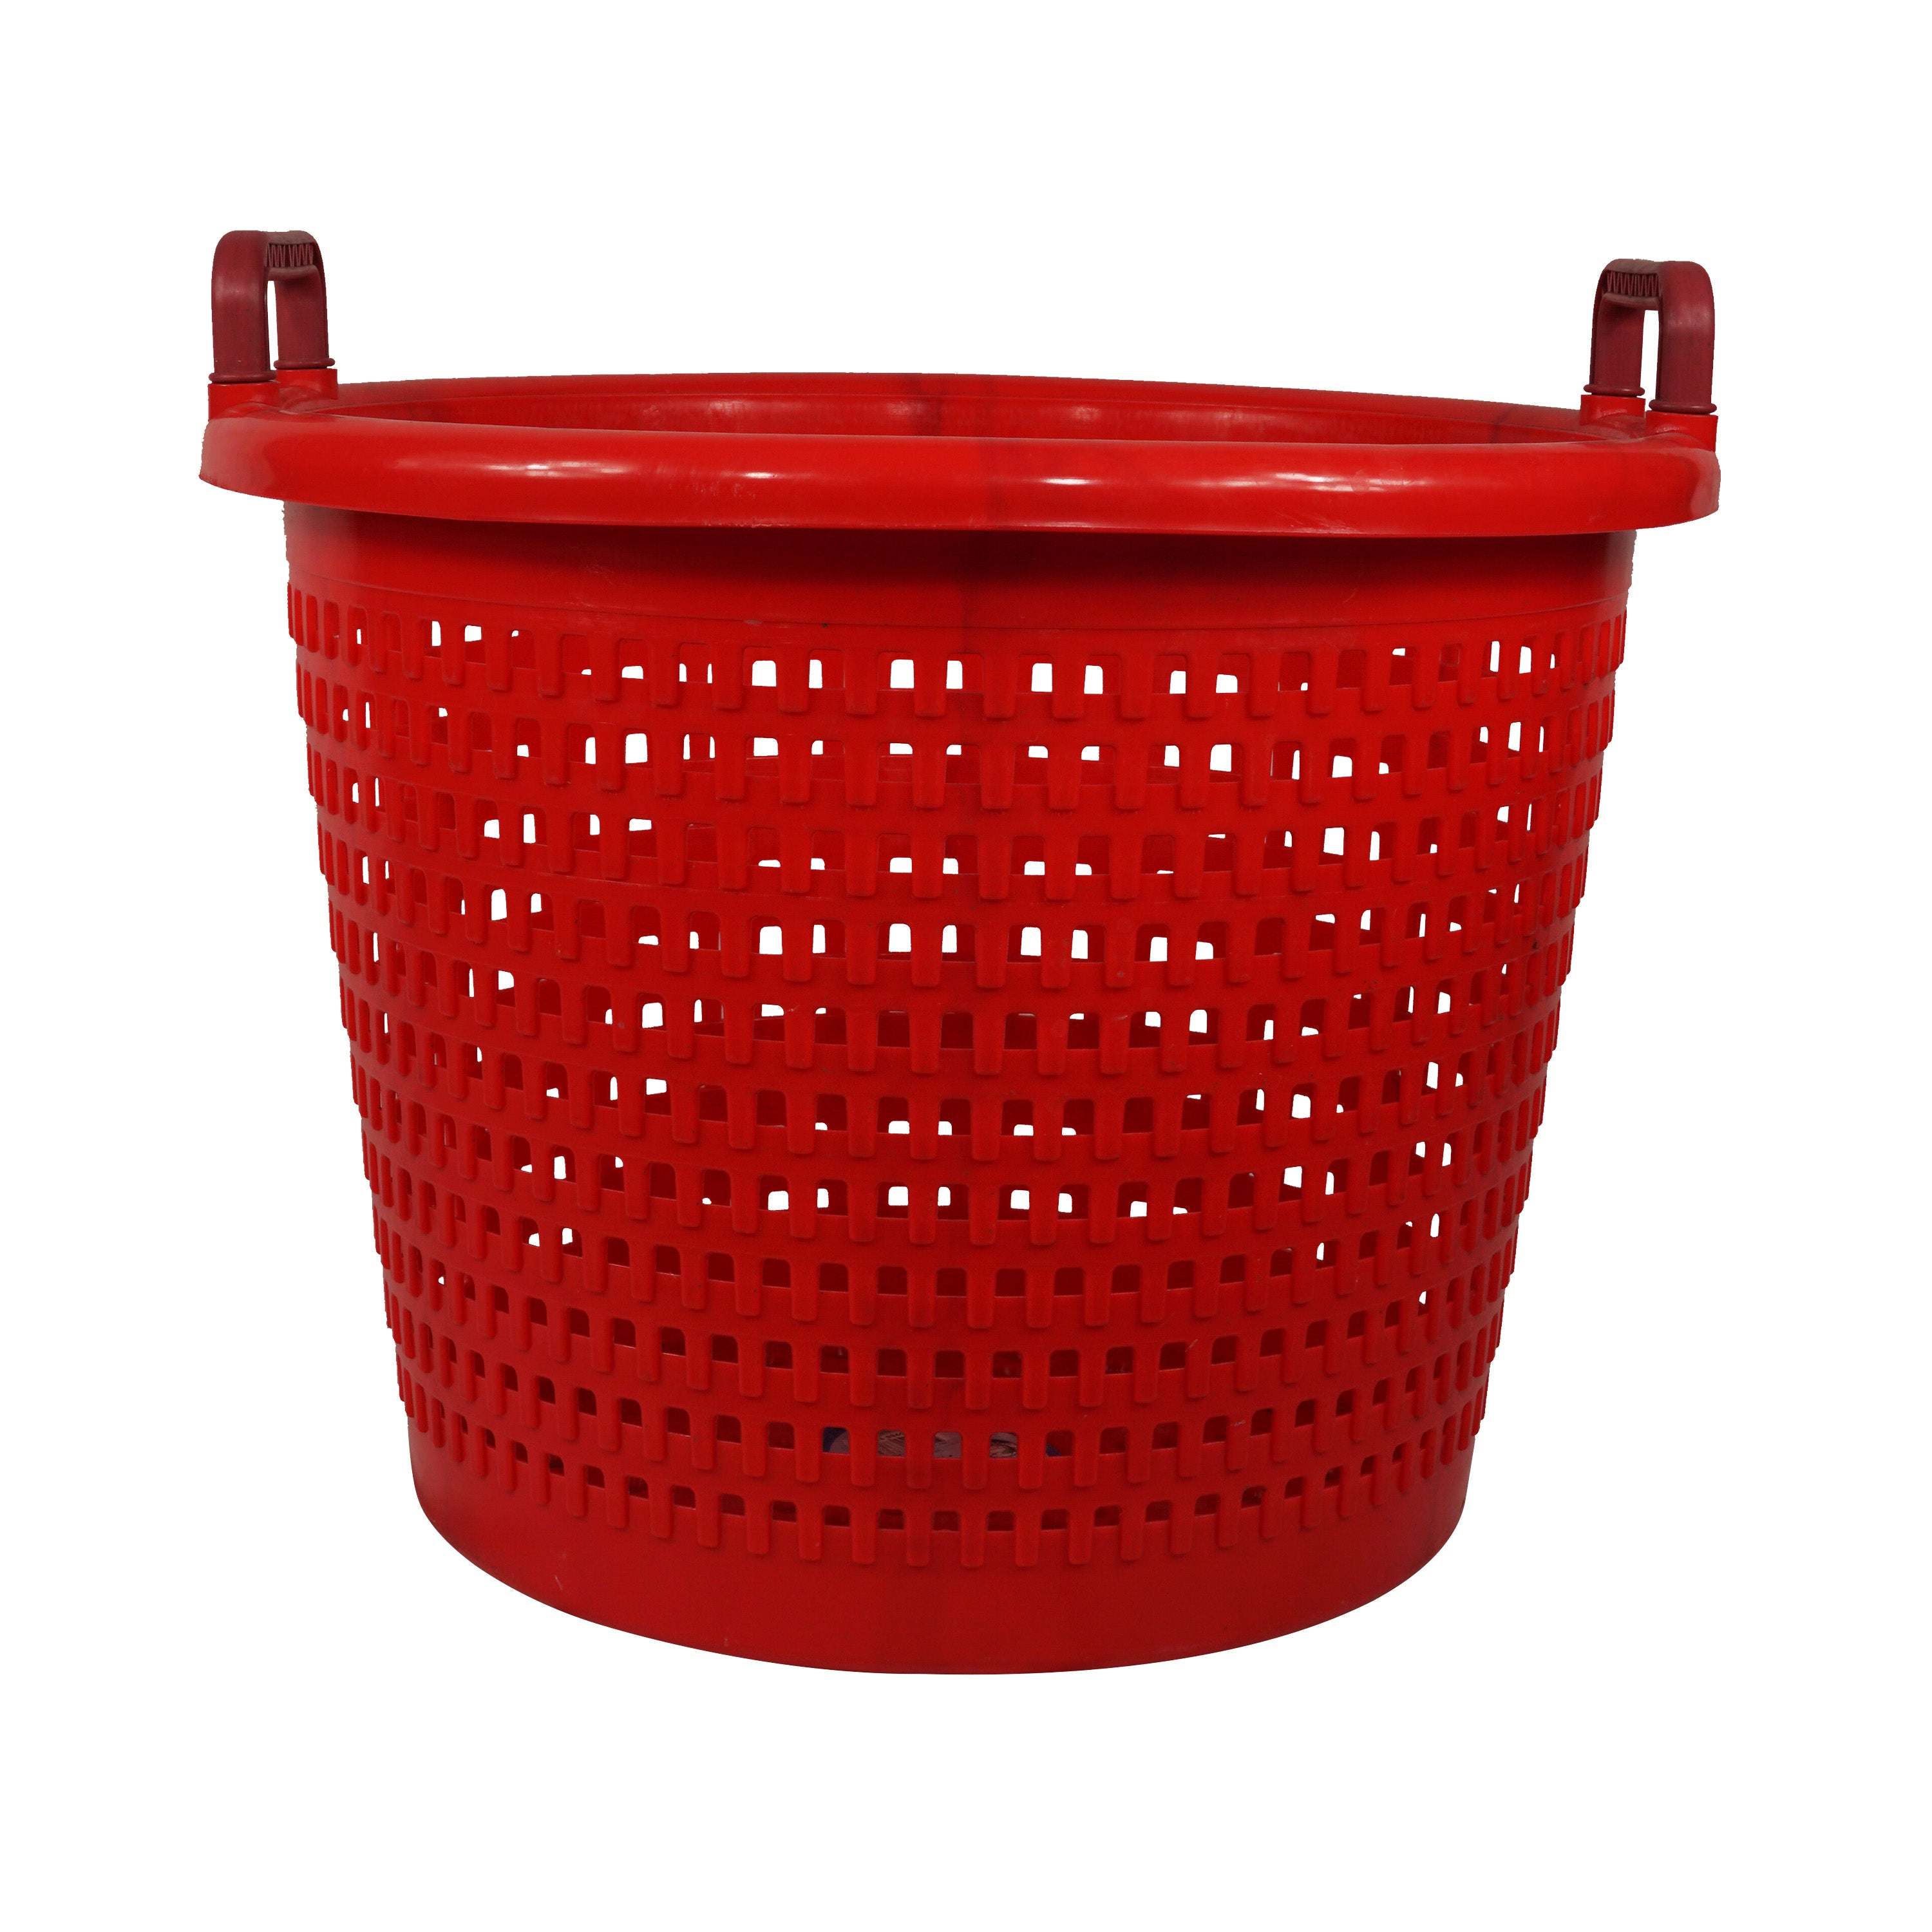 Joy Fish Heavy Duty Large Multi-Usage Baskets- for Fishing, Indoor, Outdoor Red / 4 Pcs